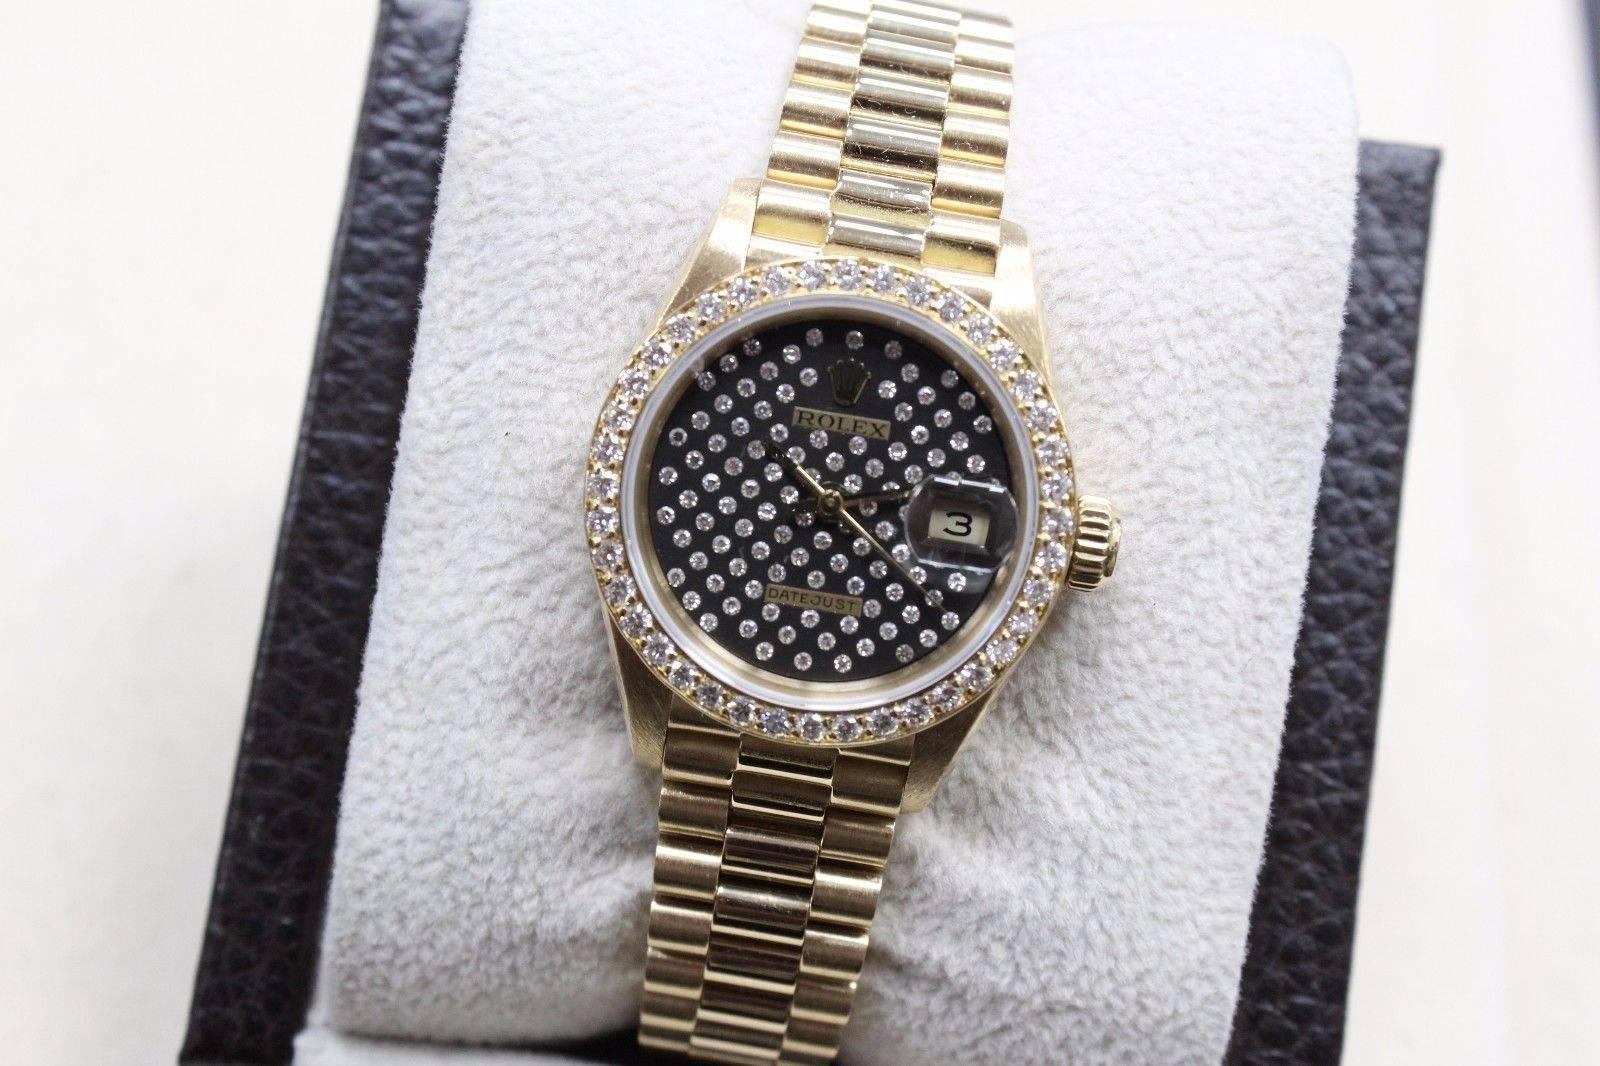 Style Number: 69138
Serial: 9058***
Model: Ladies President 
Case: 18K Yellow Gold
Band: 18K Yellow Gold
Bezel: Factory Diamond Bezel 
Dial: Factory Diamond Dial 
Face: Sapphire Crystal
Case Size: 26mm
Includes: 
-Elegant Watch Box
-Certified